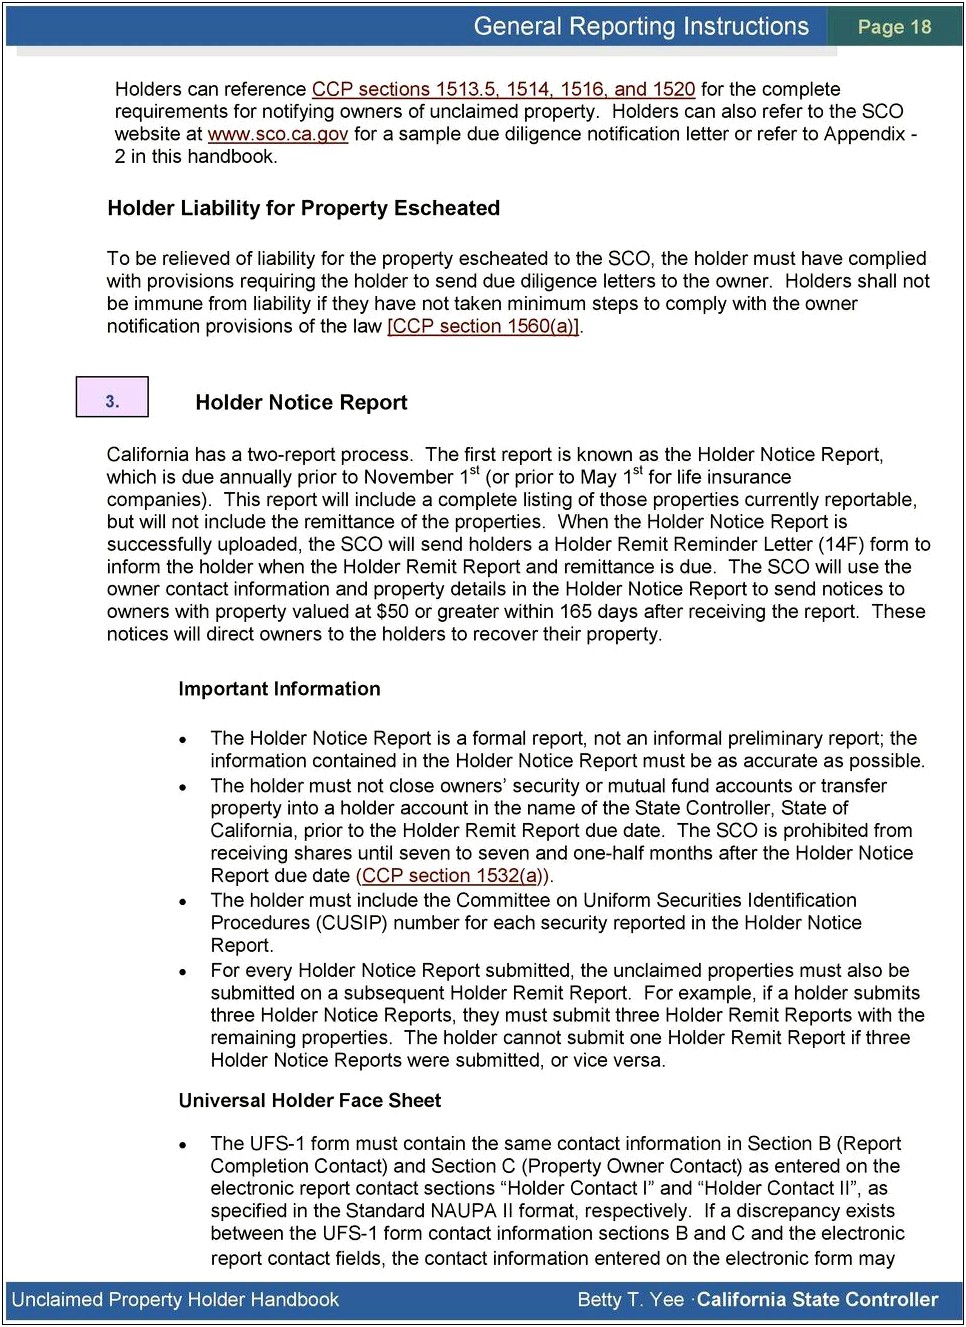 Unclaimed Property Due Diligence Letter Template